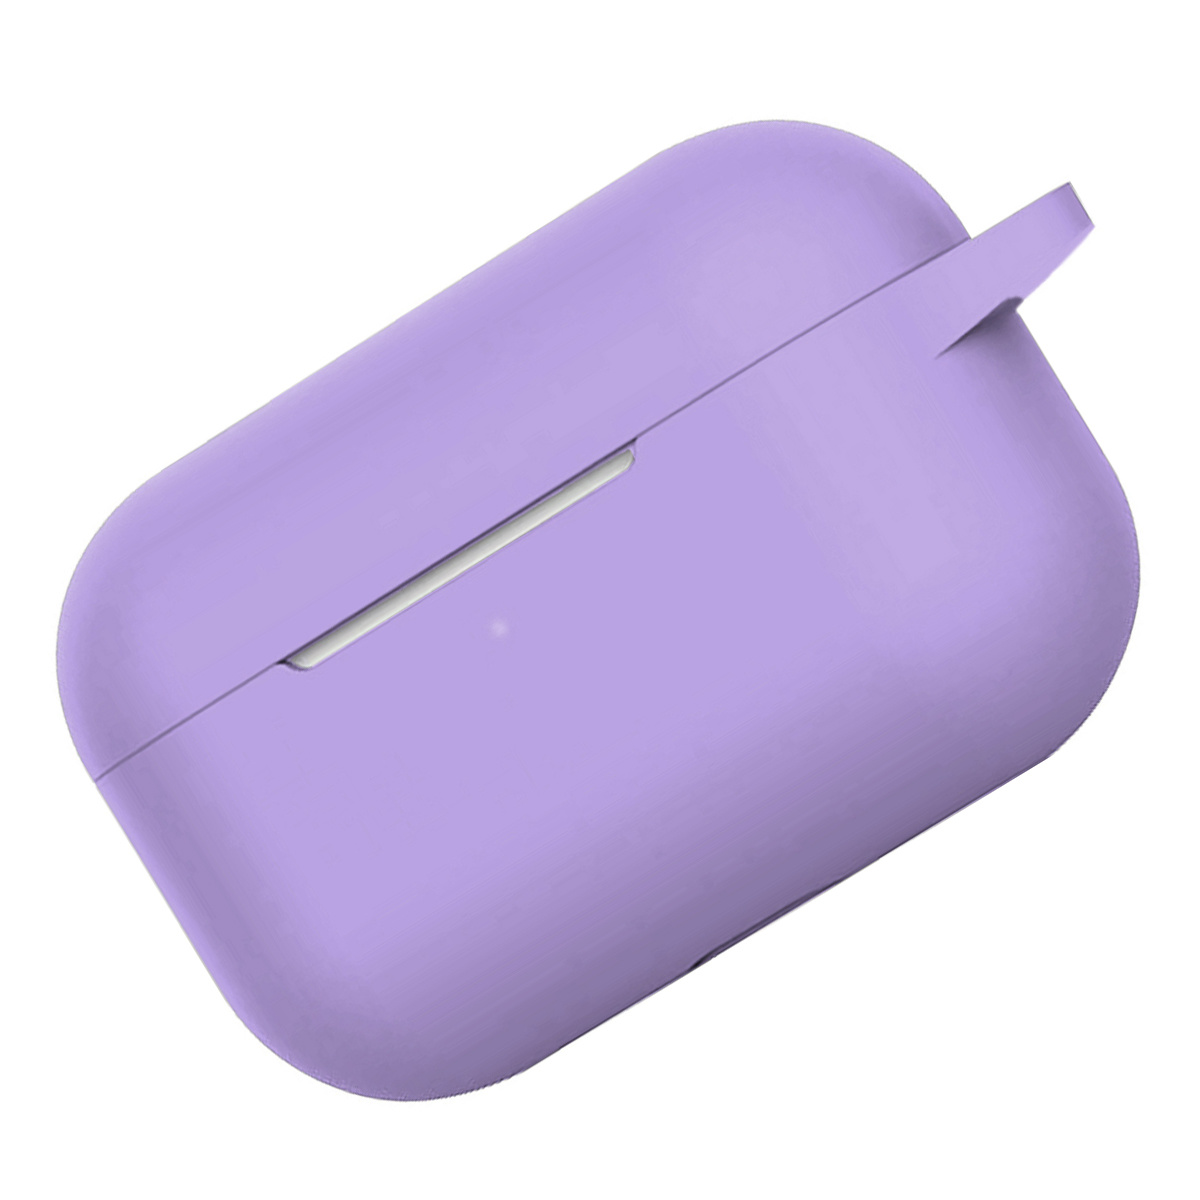 NoXx Hoes Geschikt voor Airpods Pro Hoesje Cover Silicone Case Hoes - Lila